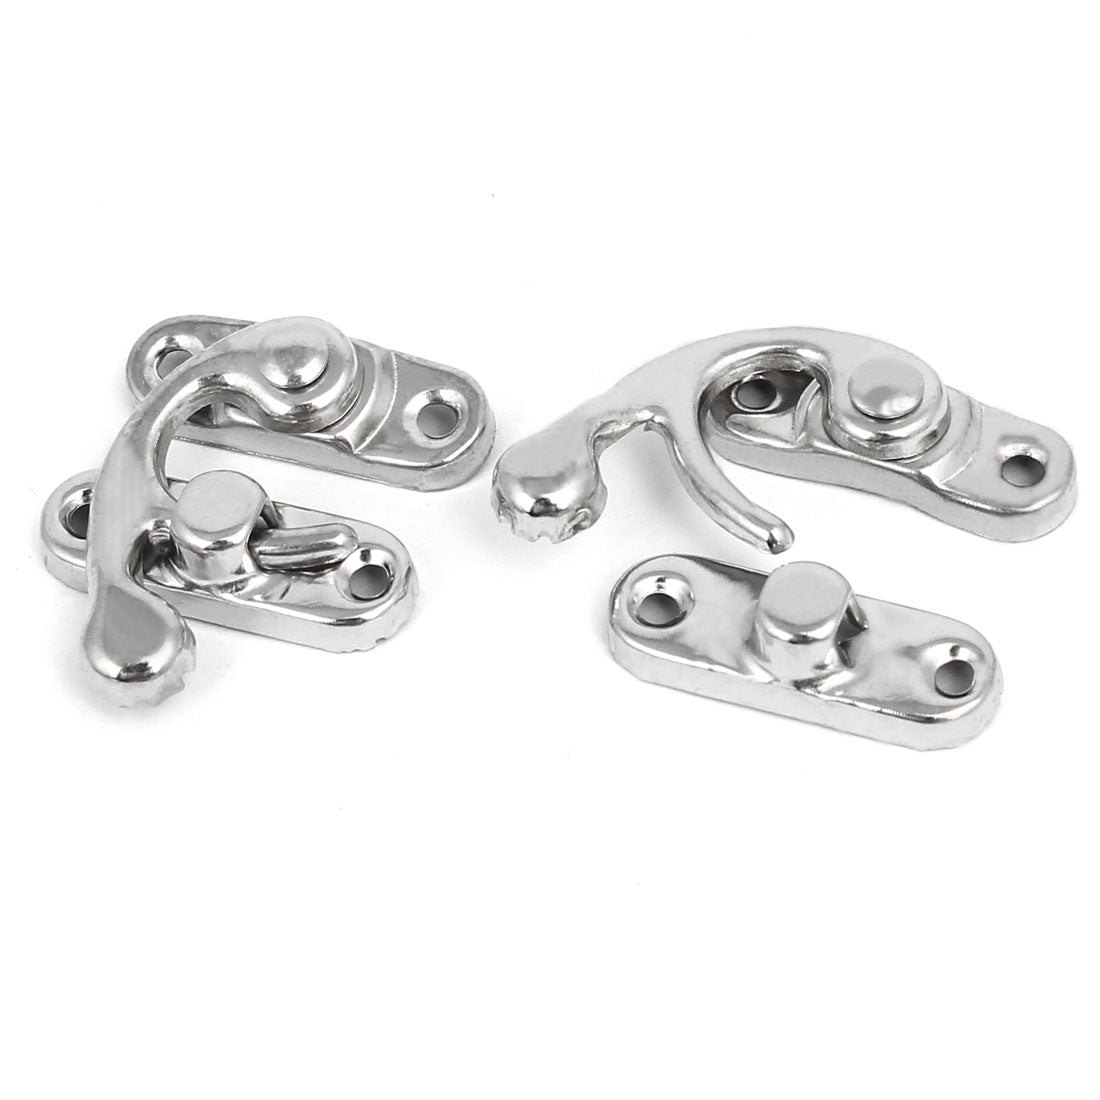 uxcell Uxcell Jewelry Gift Box Left Swing Arm Clasp Latches Toggle Hasp Silver Tone 10PCS